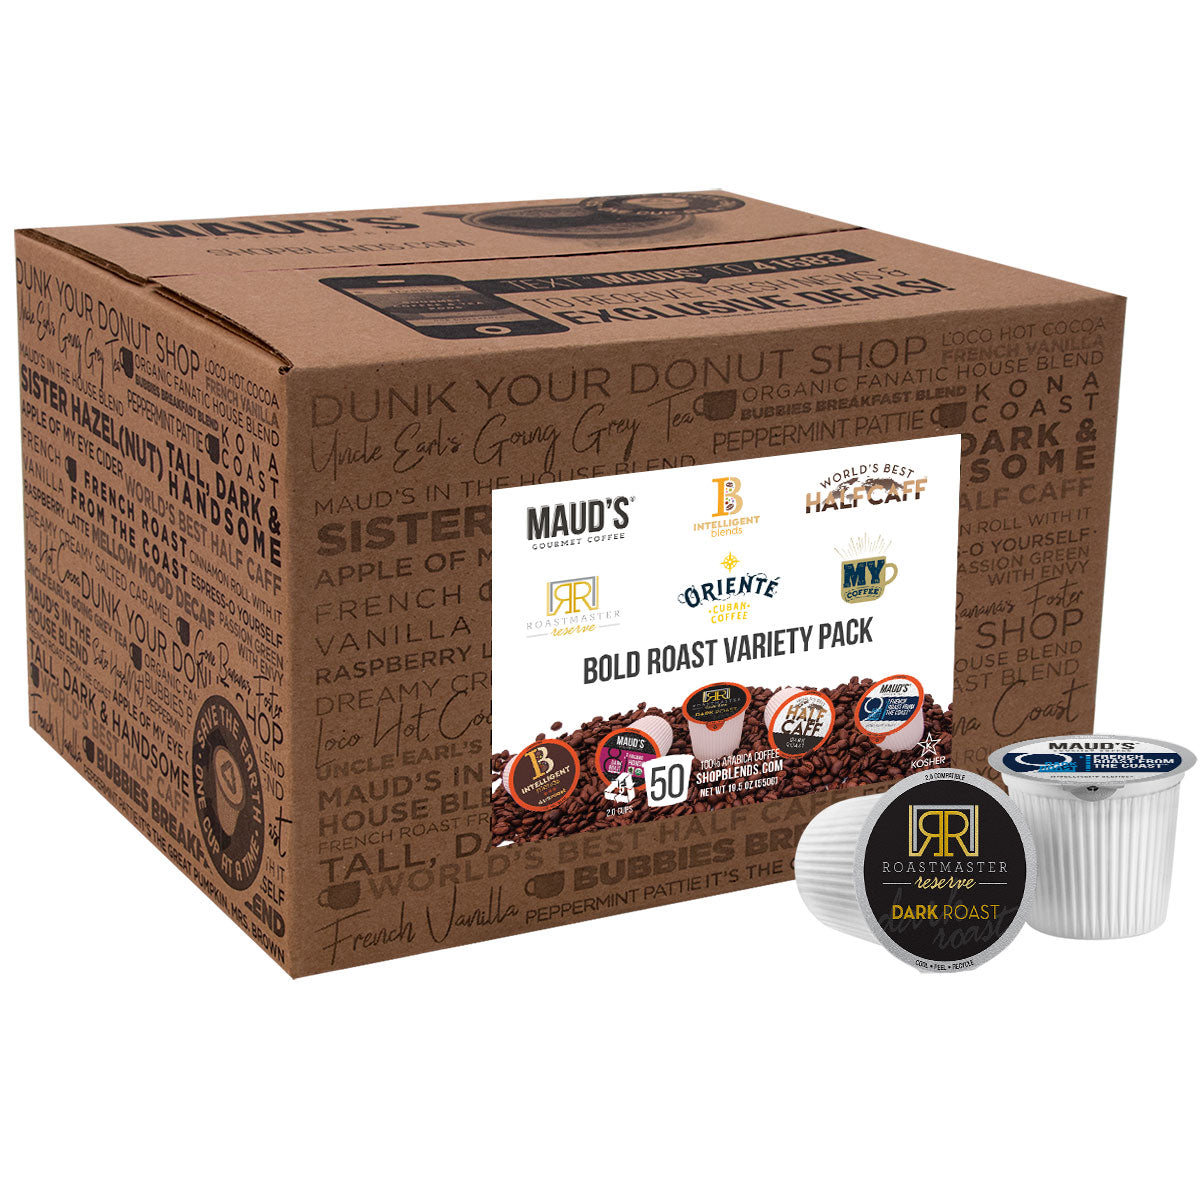 Gran Café Variety Pack - the best coffee quality for your